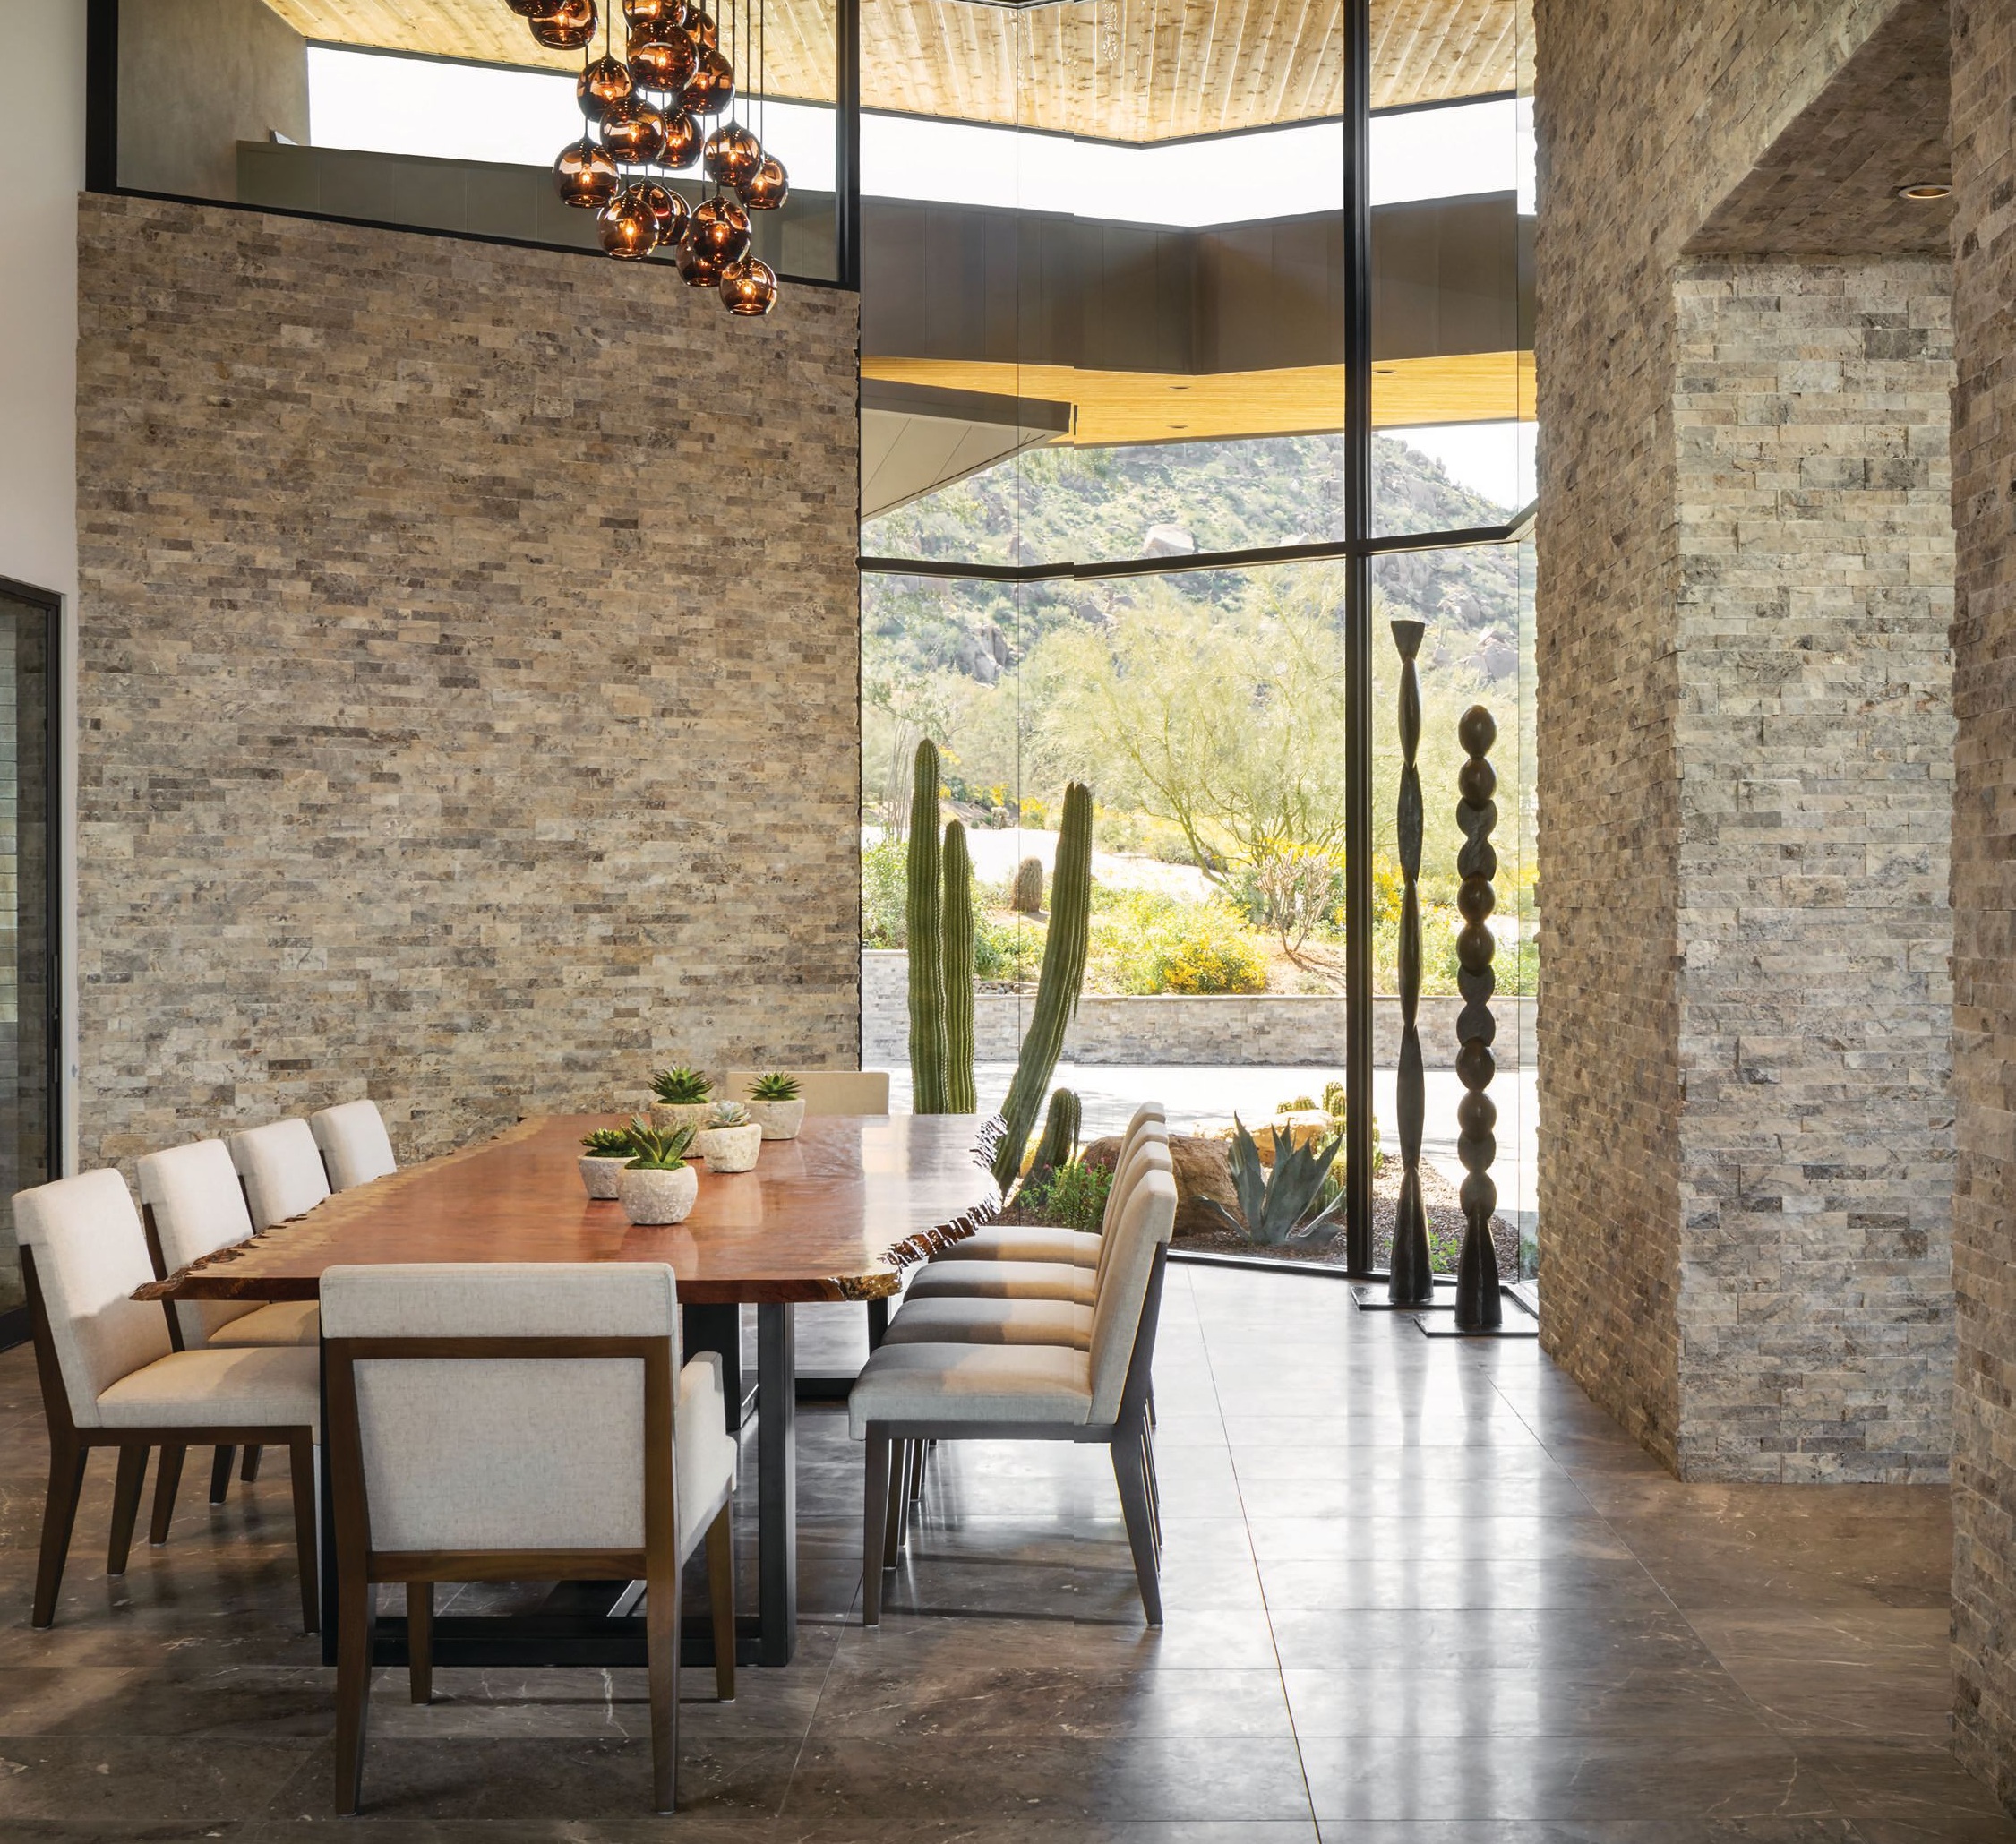 While the exterior of the home is more extreme architecturally, inside, an abundance of natural stone creates warmth and provides a feeling of protection from the outdoors. “The dining room is enveloped with stone so it has a really amazing grounded sense,” Drewett explains. PHOTOGRAPHED BY JEFF ZARUBA